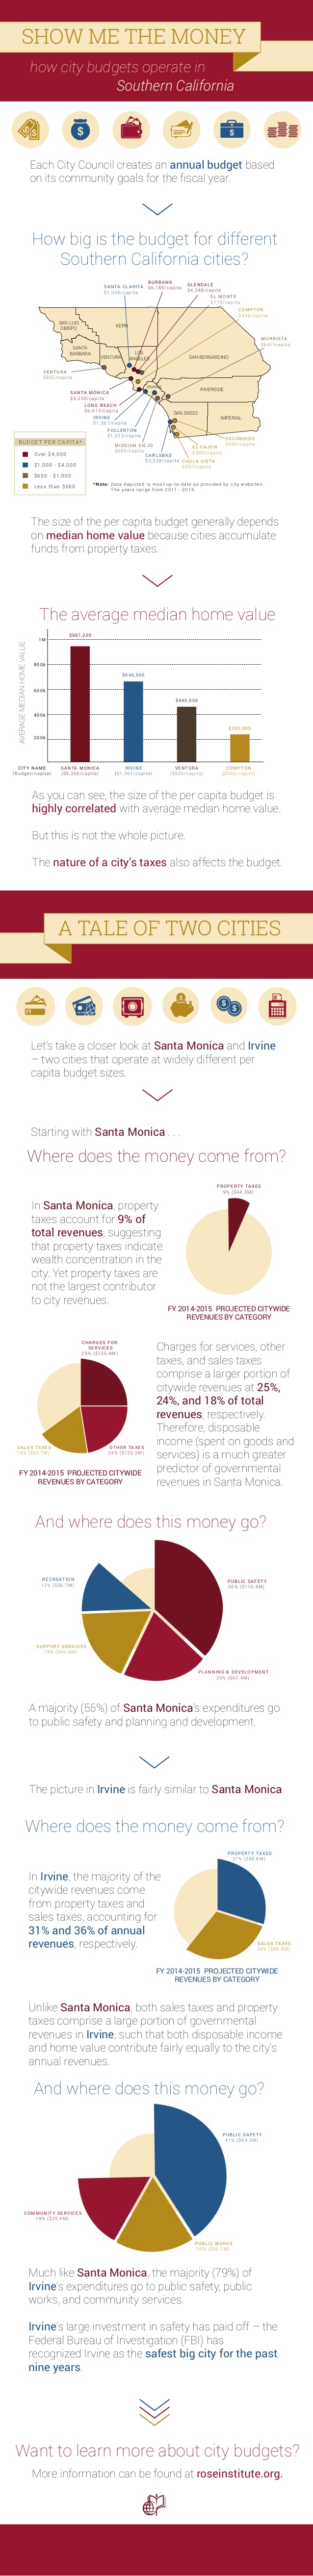 show-me-the-money-how-city-budgets-work-in-southern-california-1-638